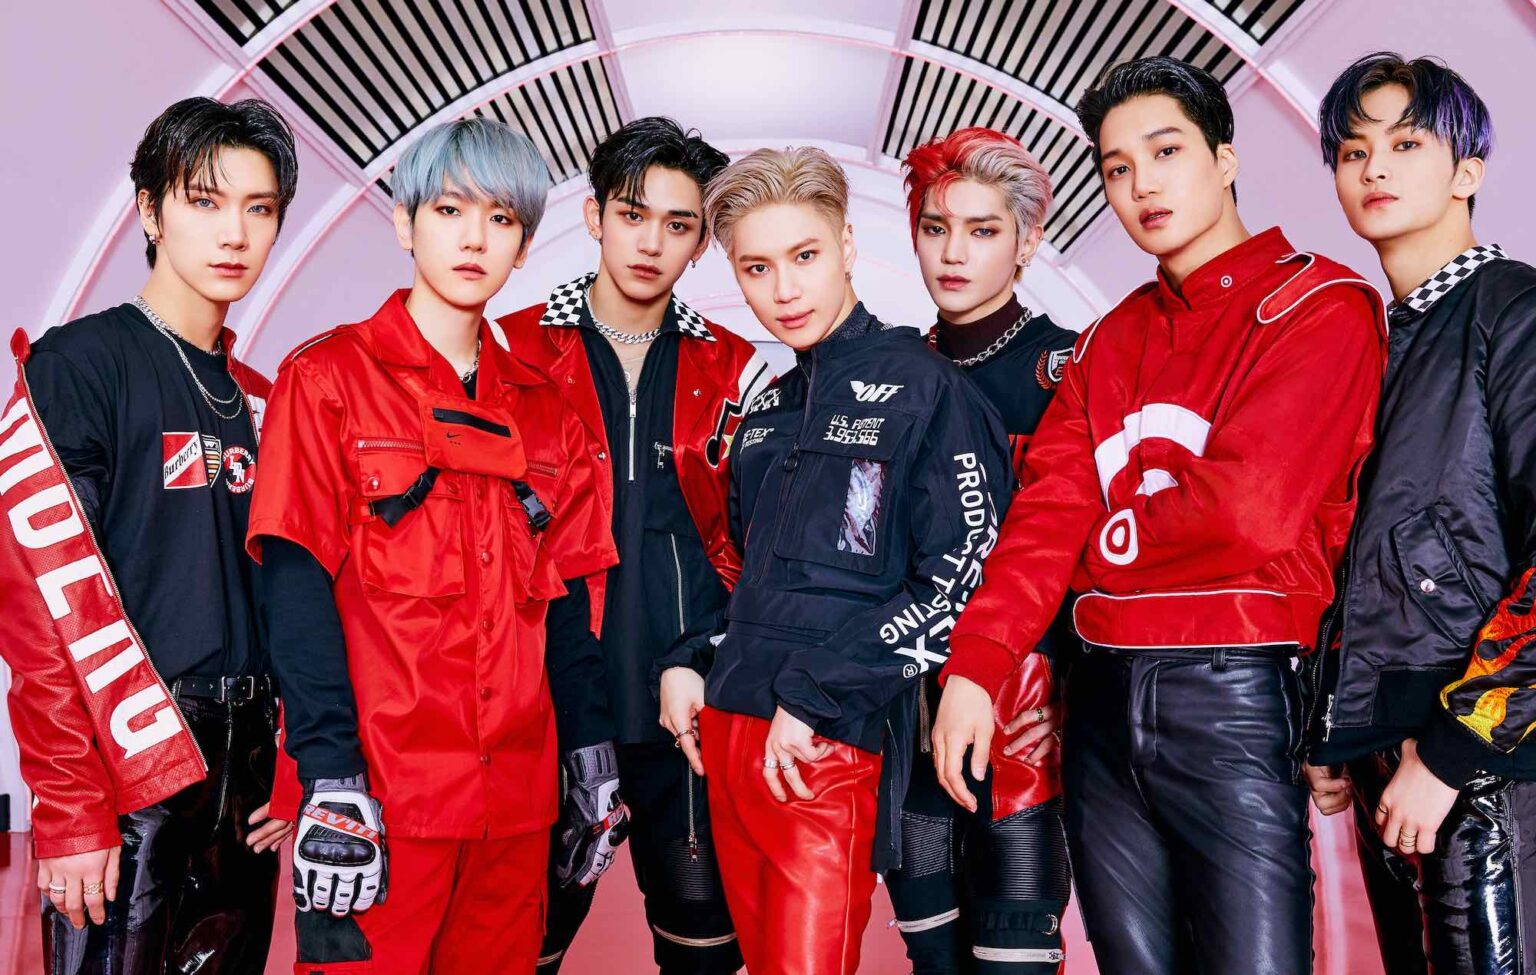 SuperM is the hottest new K-pop group around. Here’s a who’s who of SuperM and everything you need to know about them.